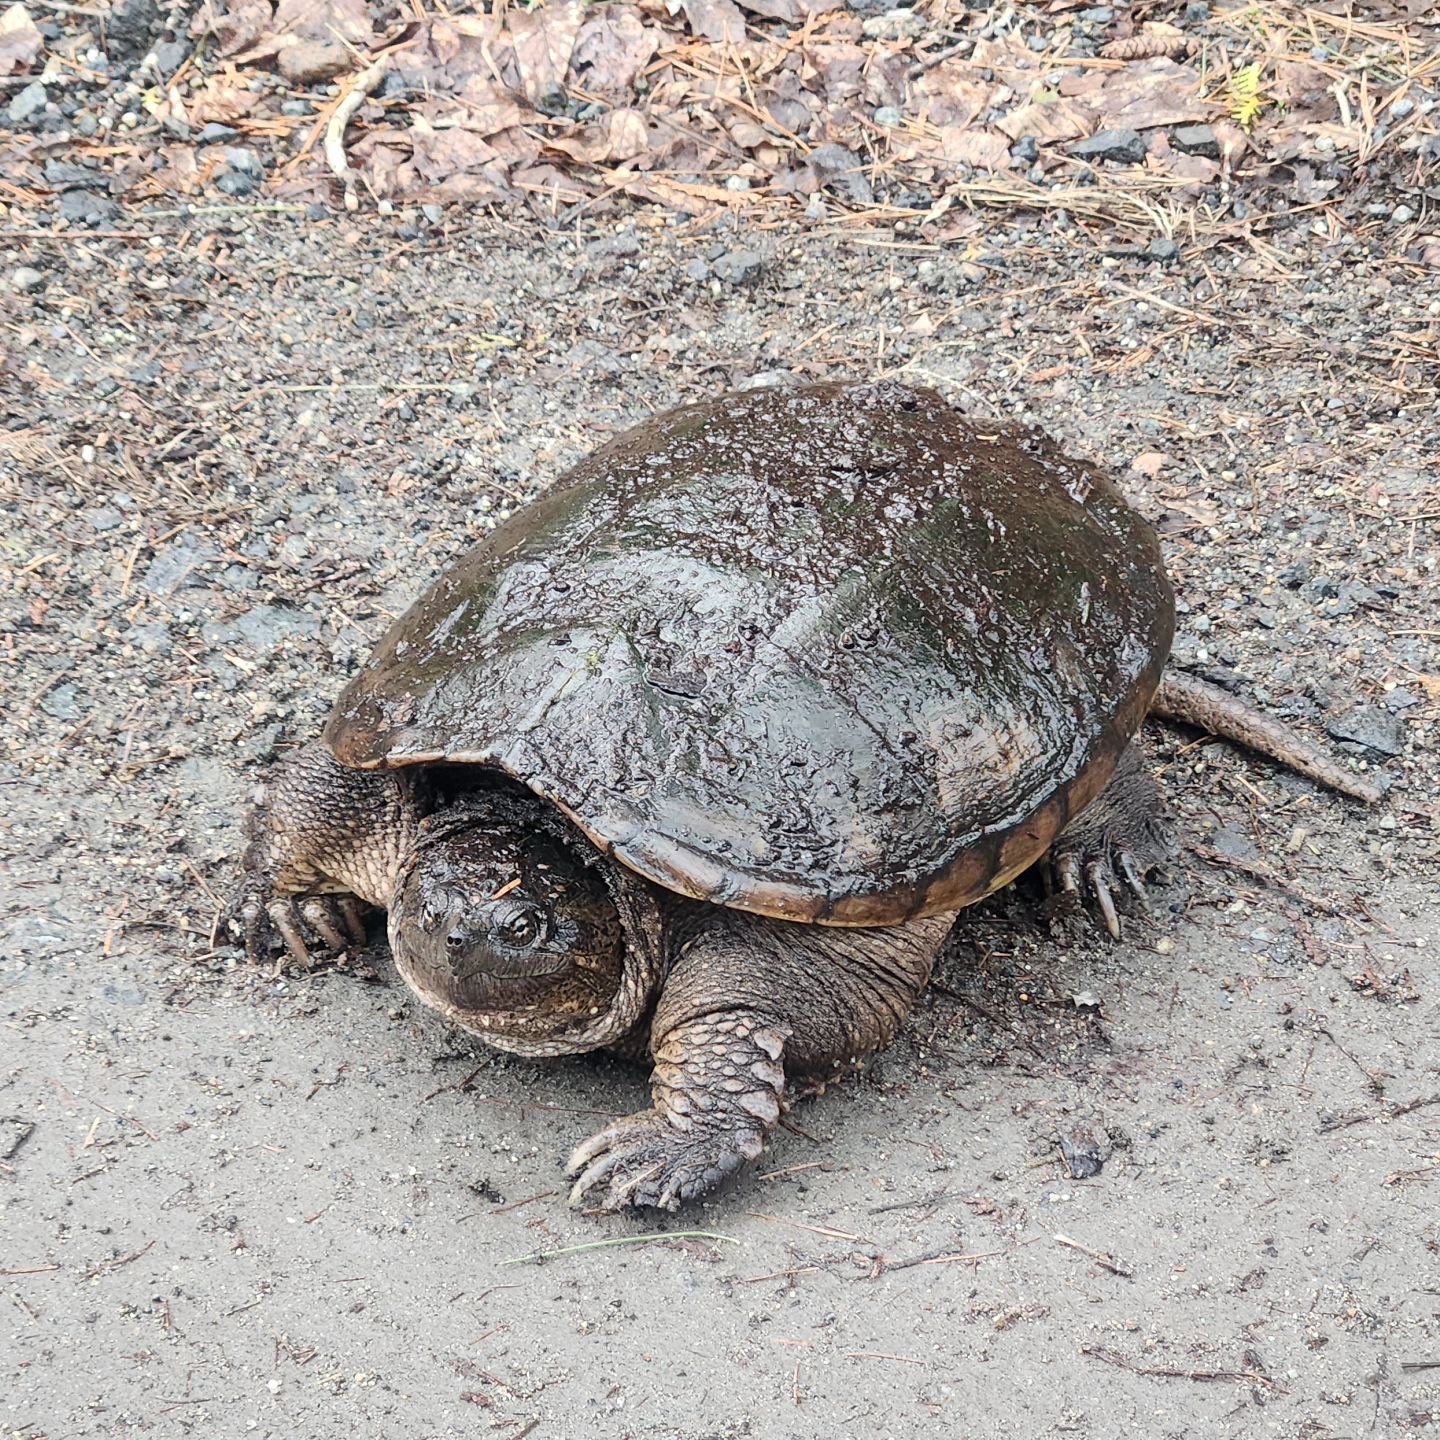 We spotted this buddy at the Gate Lodge, but we didn't dare get any closer...🐢💚

#adk #adirondacks #wildlife #snappingturtle #turtlesofinstagram